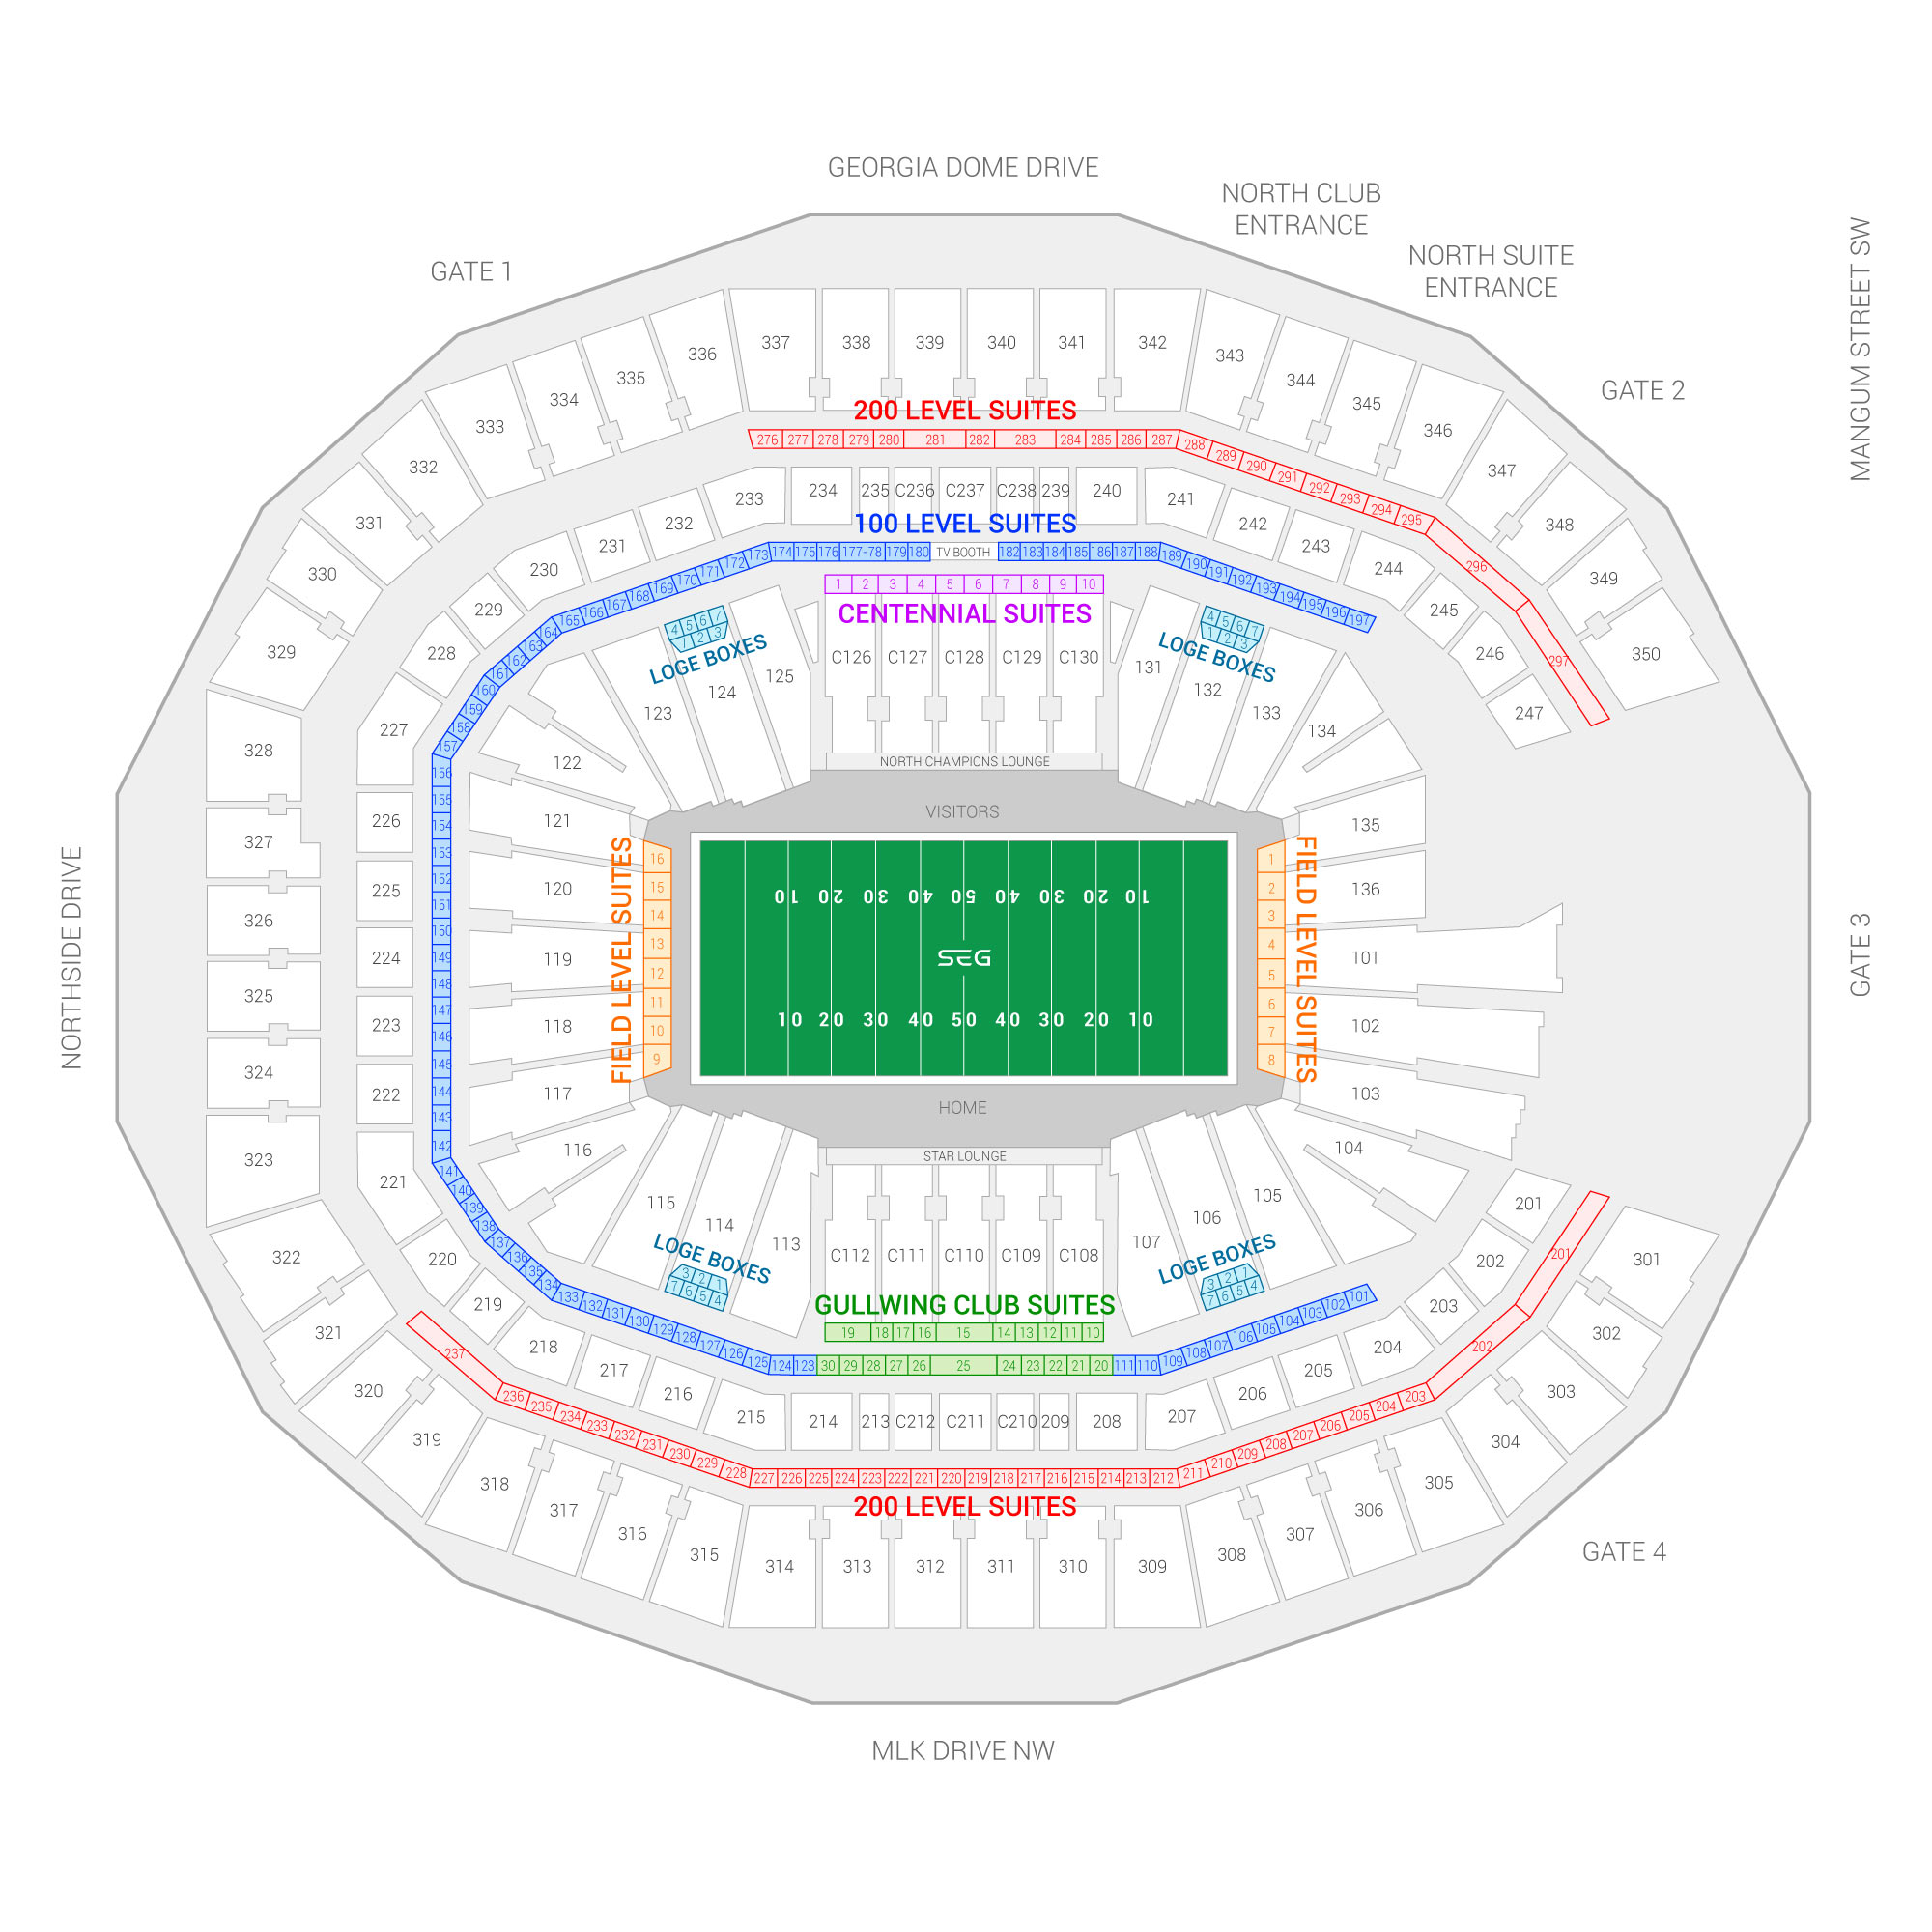 Mercedes-Benz Stadium / Chick-fil-A Peach Bowl Suite Map and Seating Chart